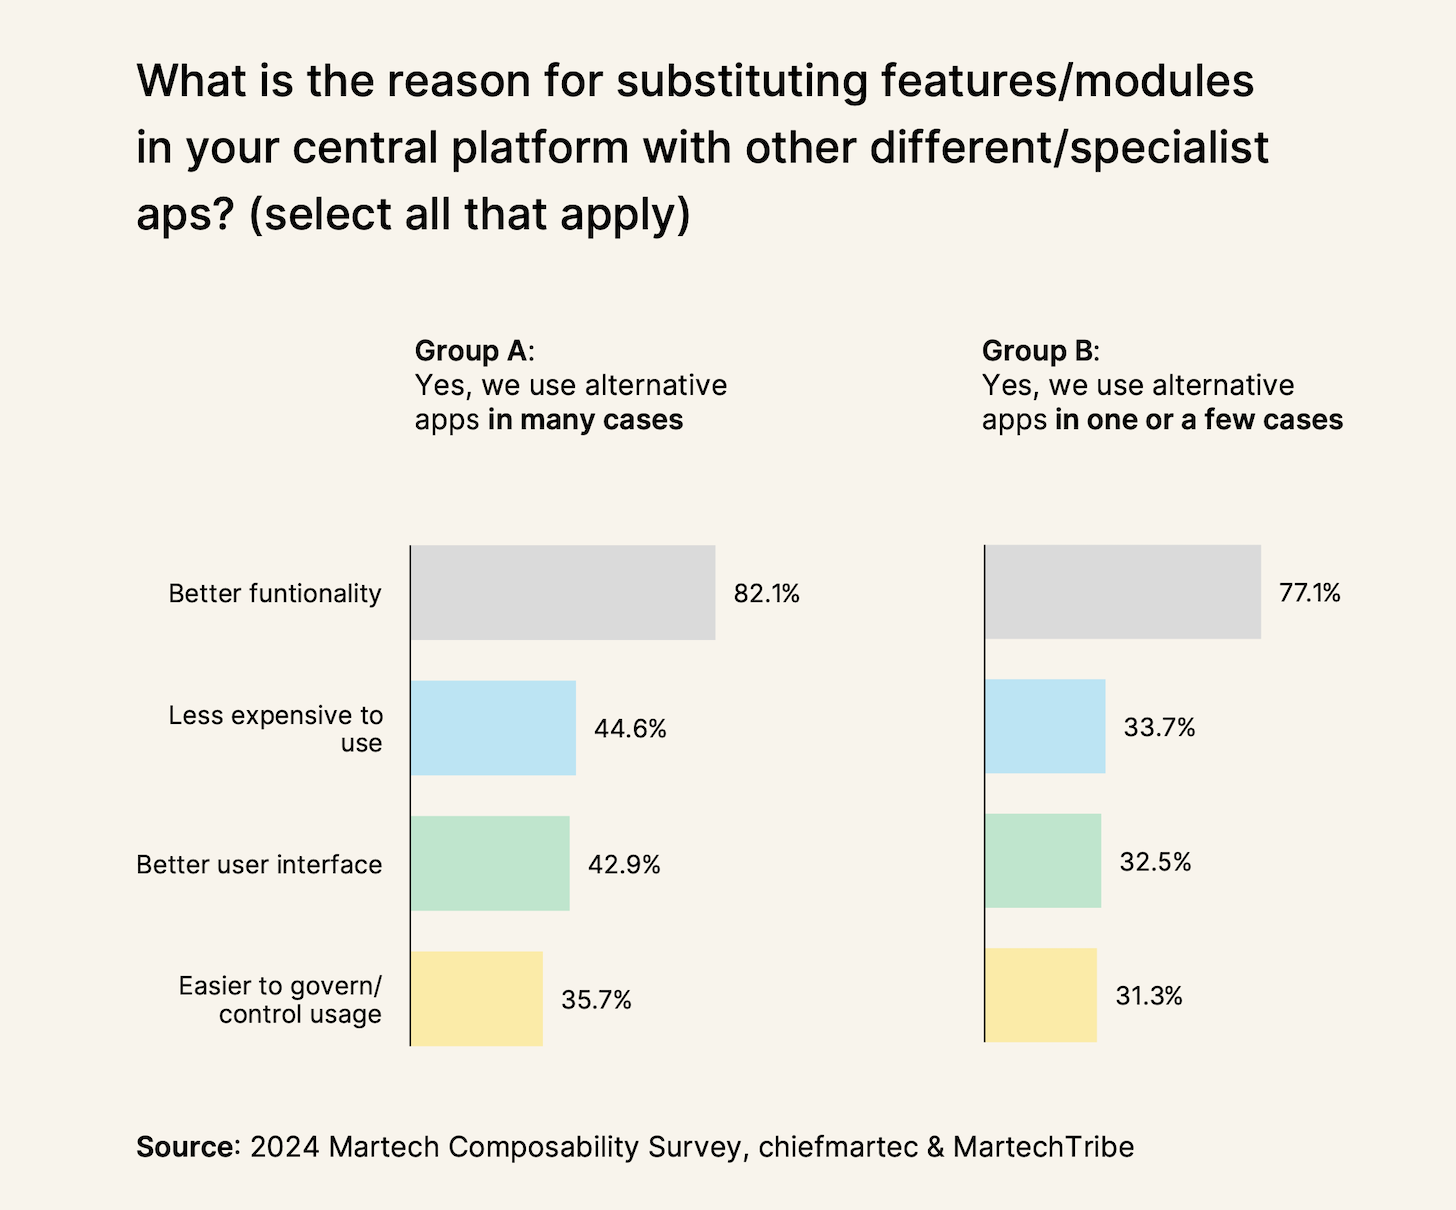 More alternative martech apps used, greater counterintuitive benefits realized